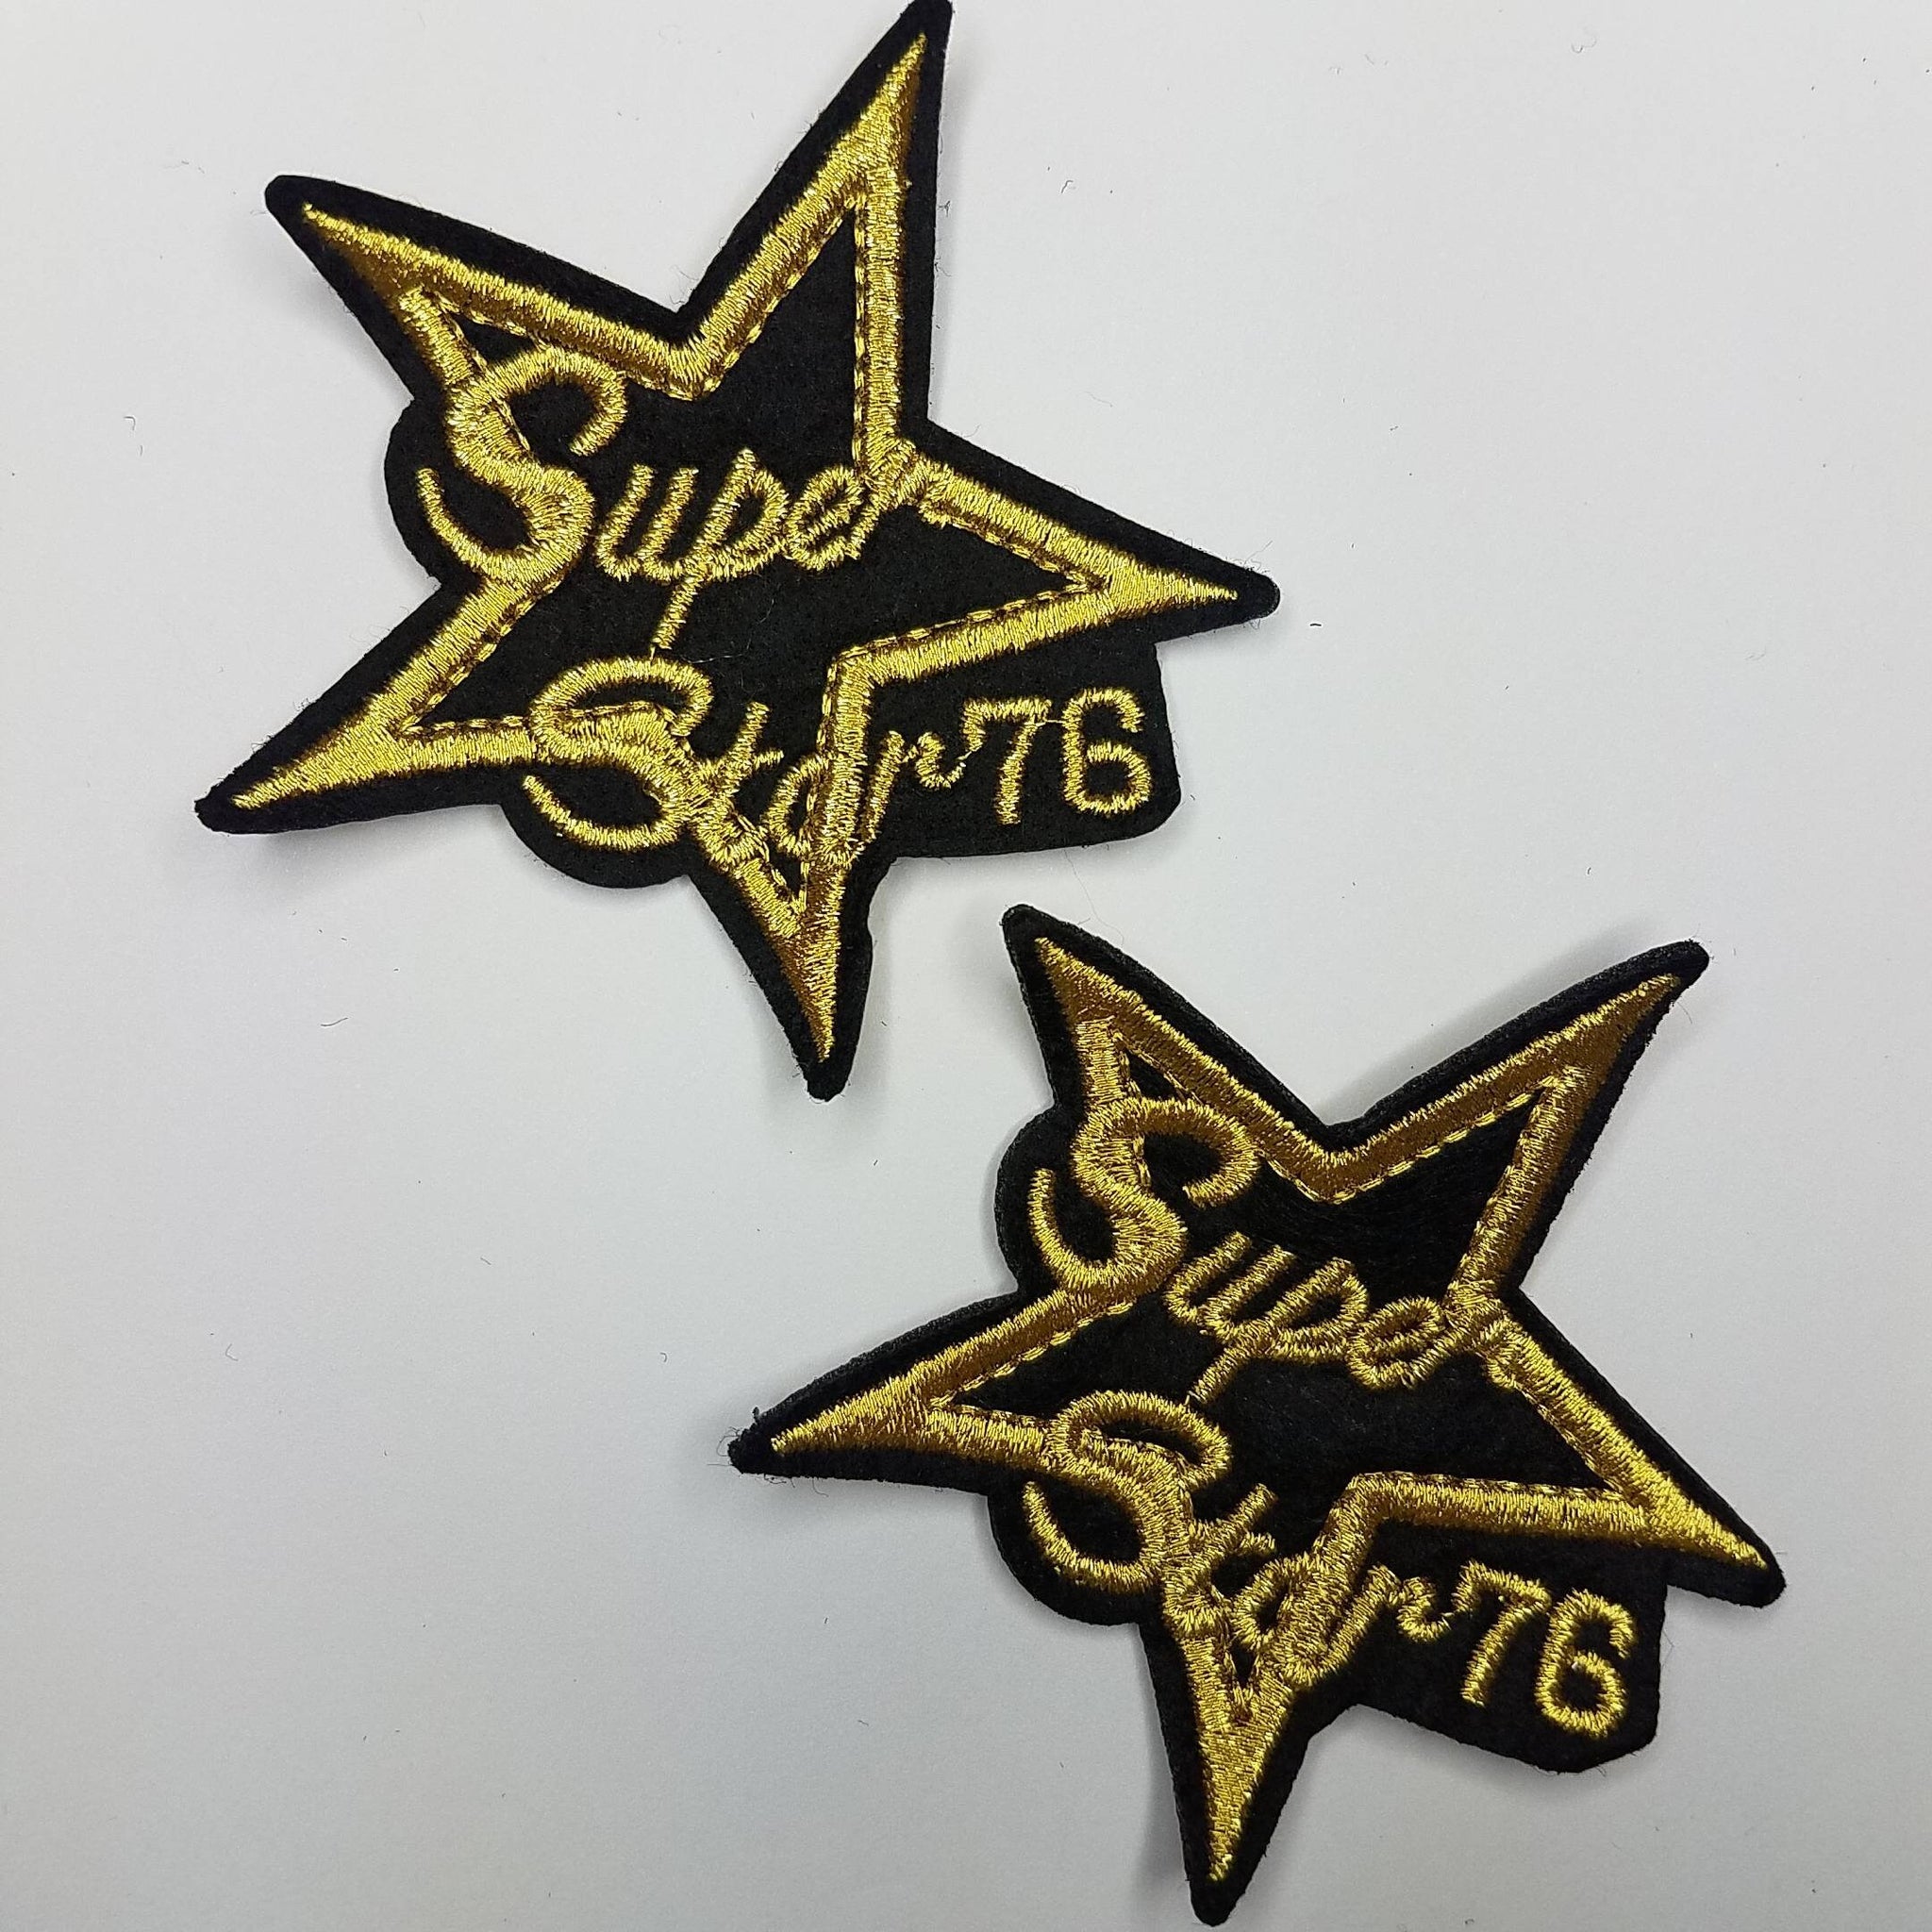 Patches Iron-on patch Small Star Black